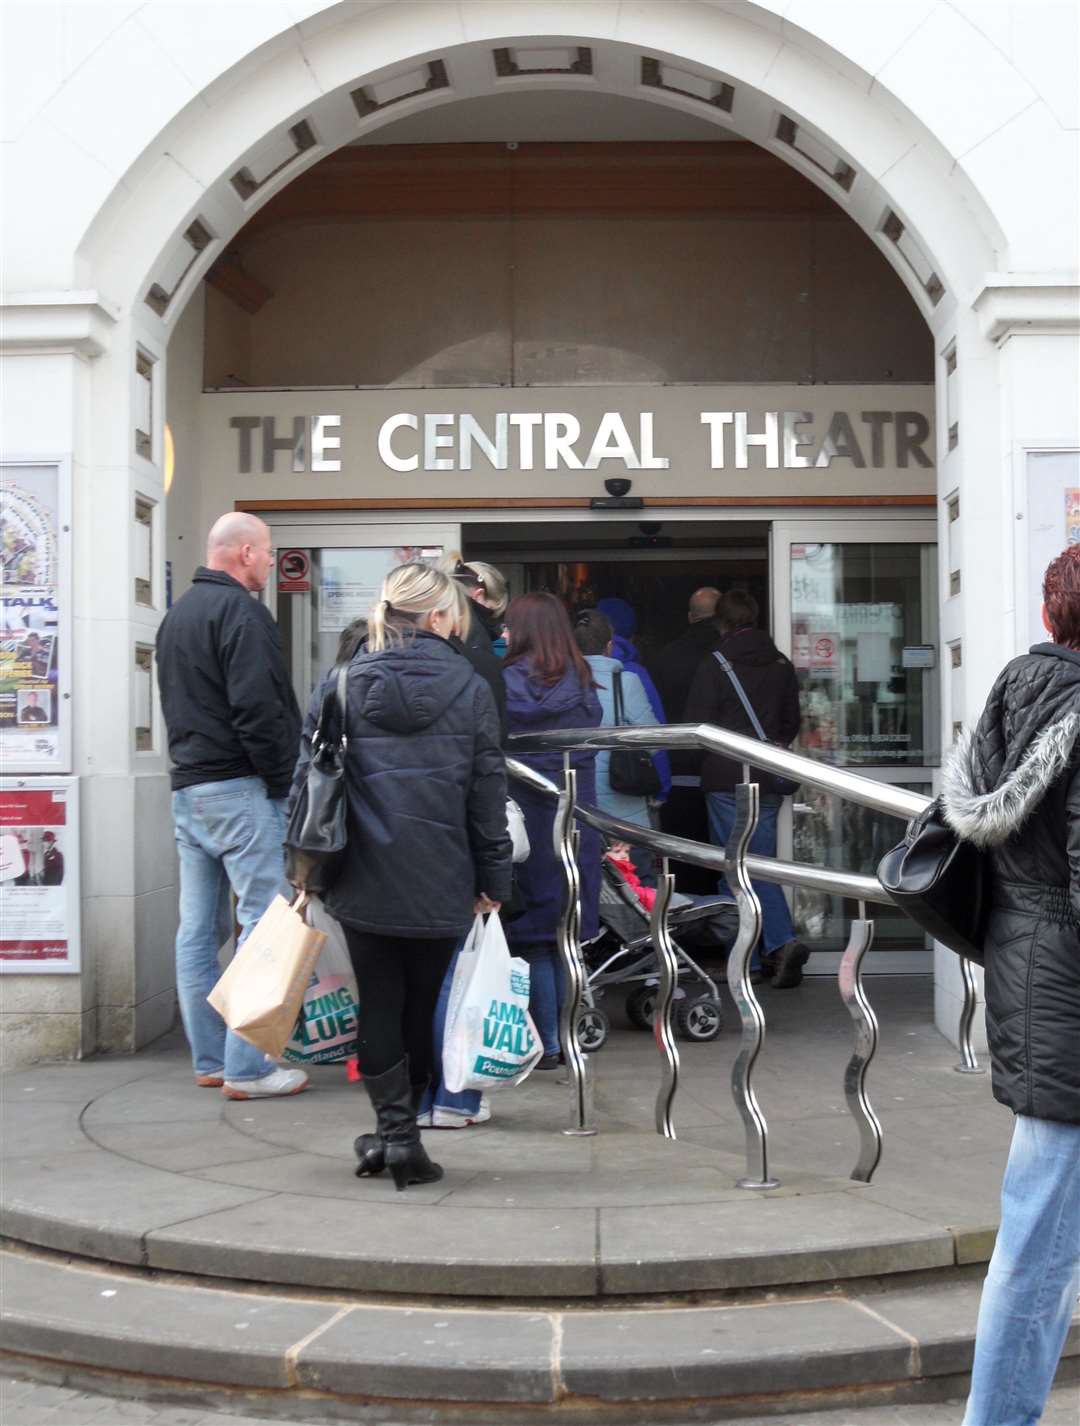 The musical will be held at The Central Theatre, Chatham